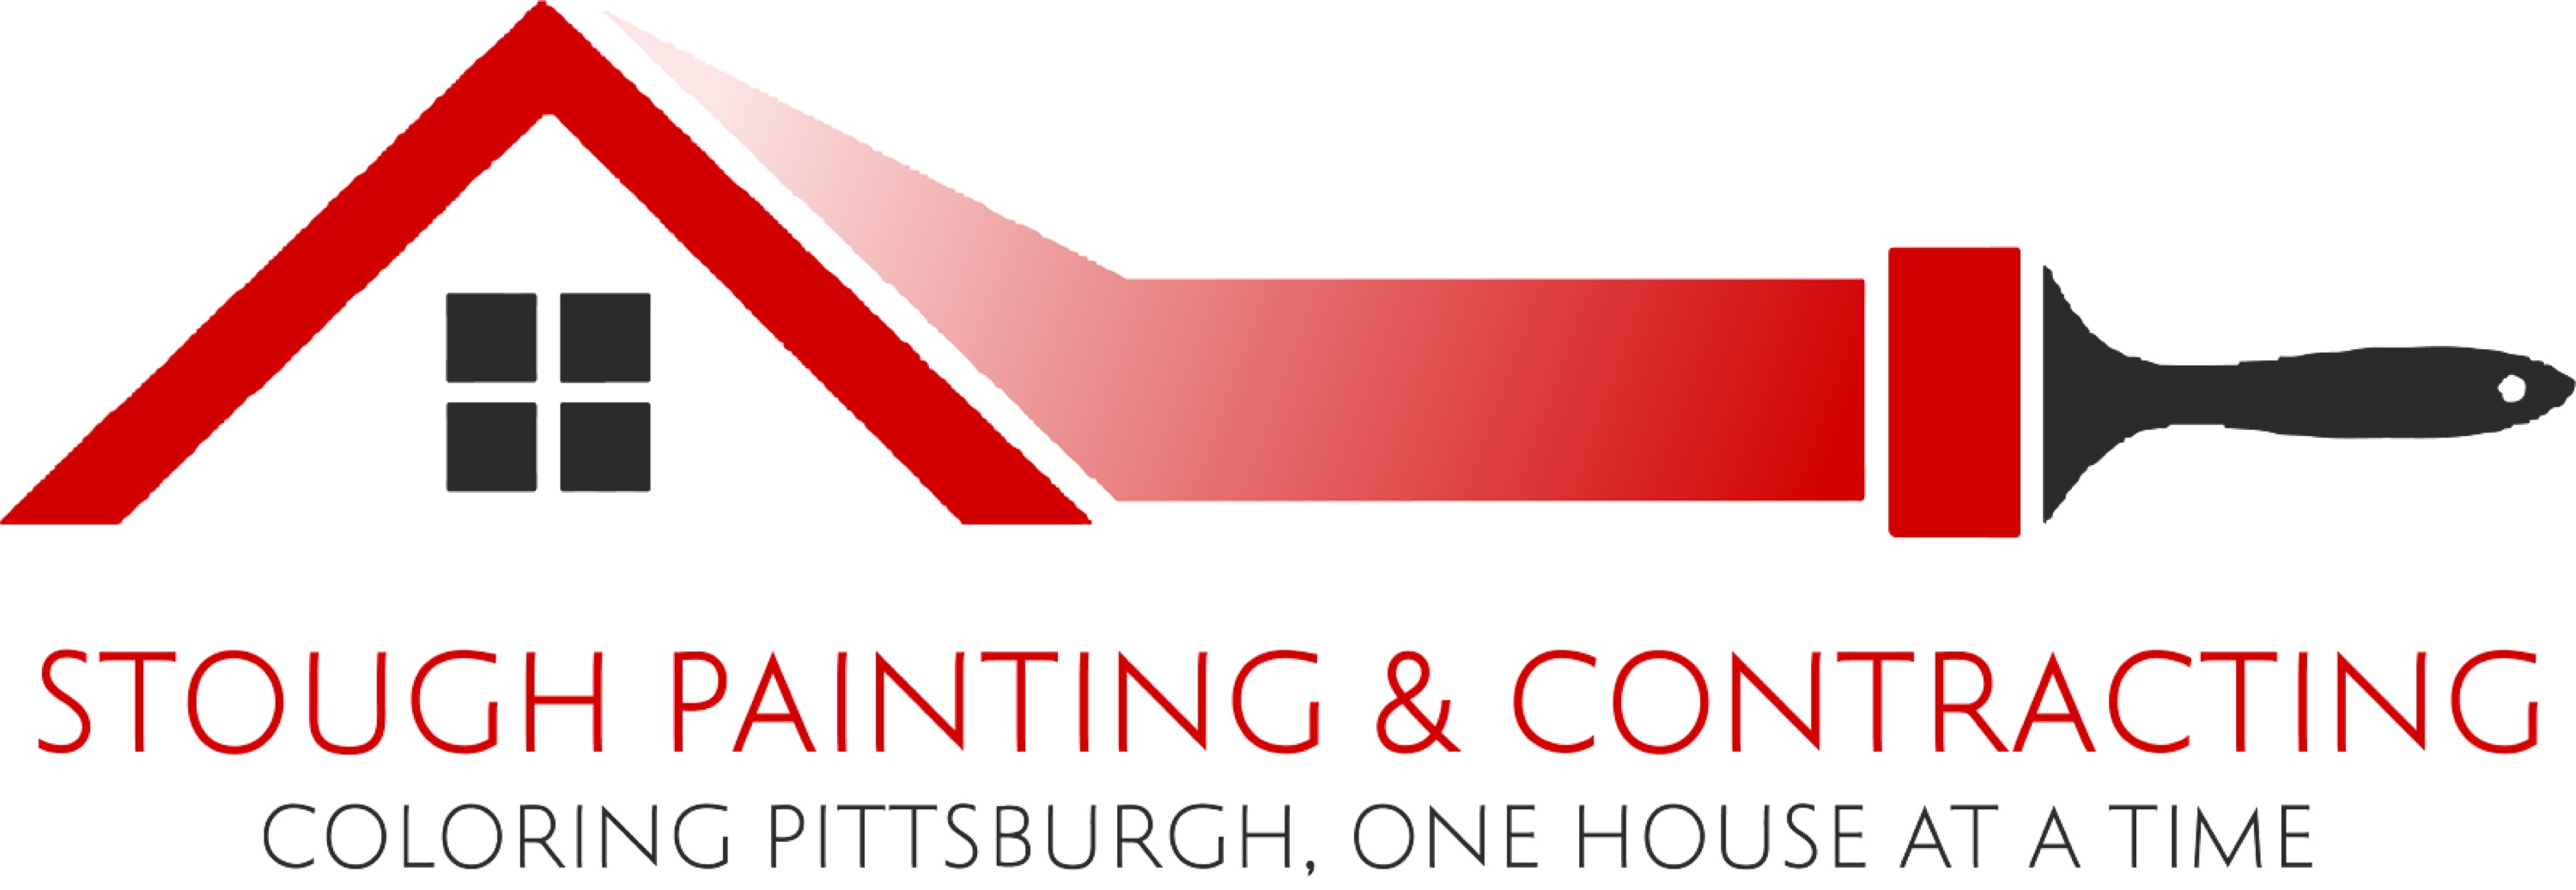 Stough Painting & Contracting Logo